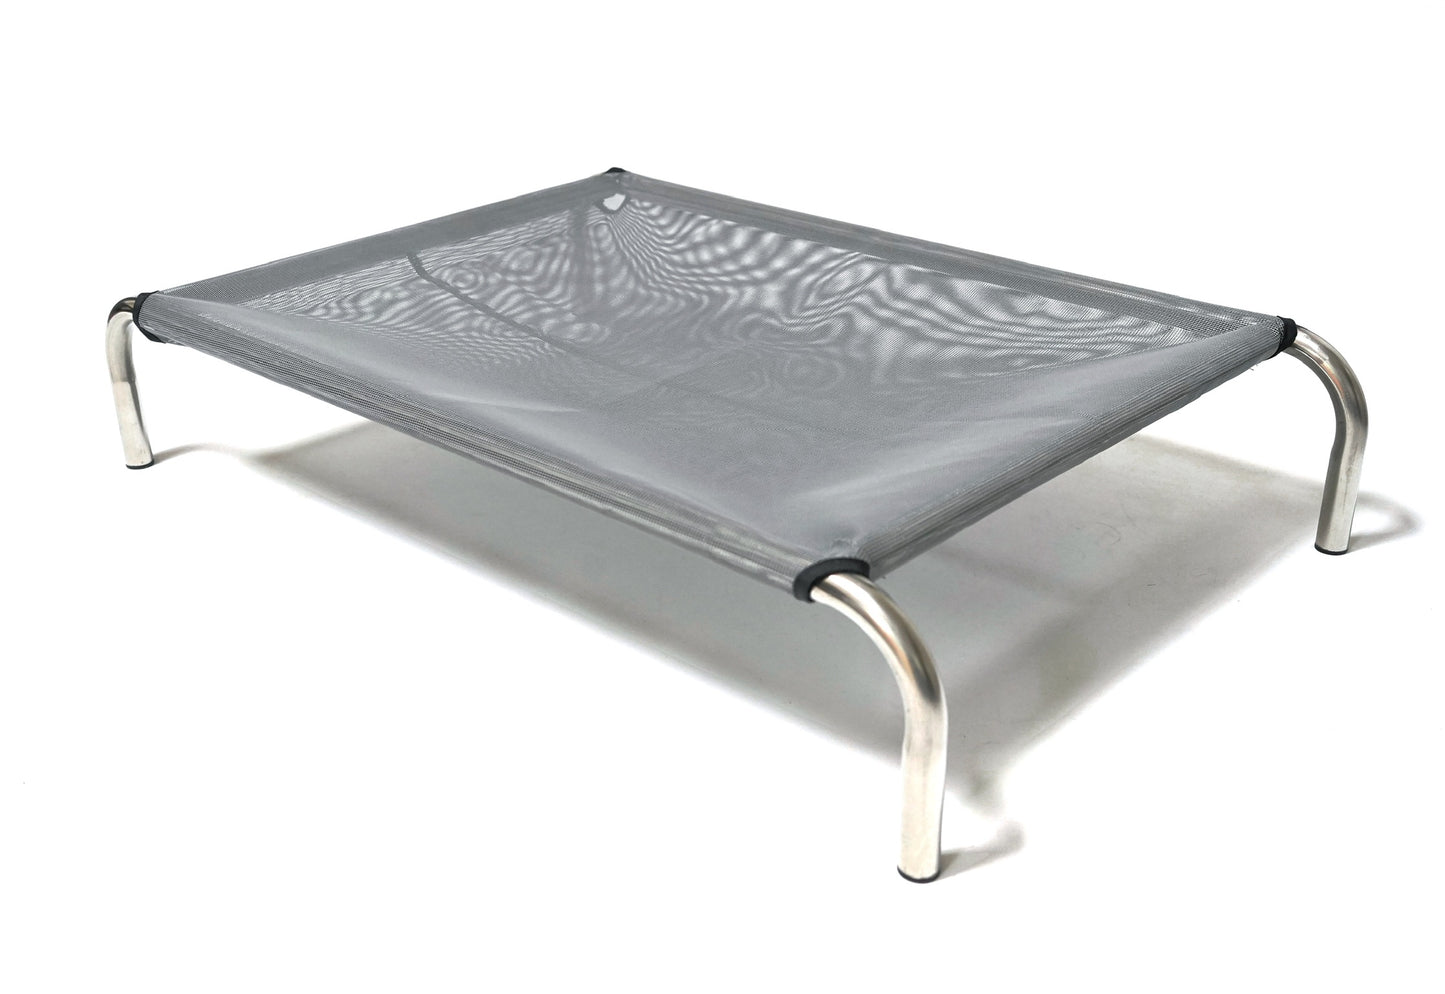 HiK9 Bed with Heavy Duty Silver Mesh Cover